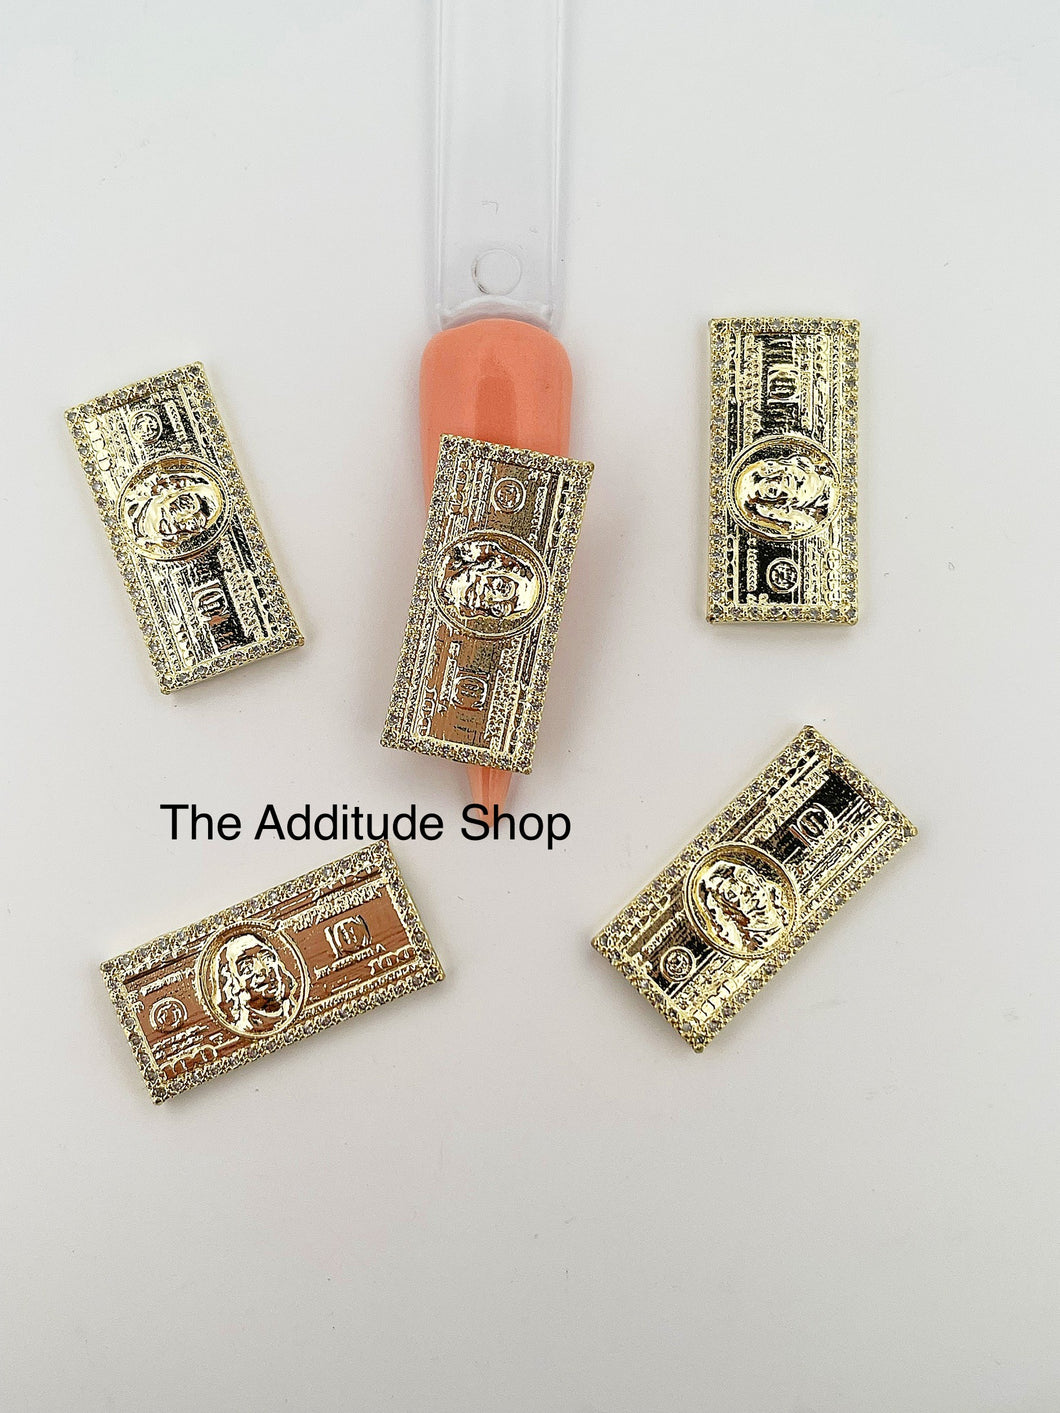 Oversized $100 Bill 3D Zircon Nail Charms (5 Pieces)